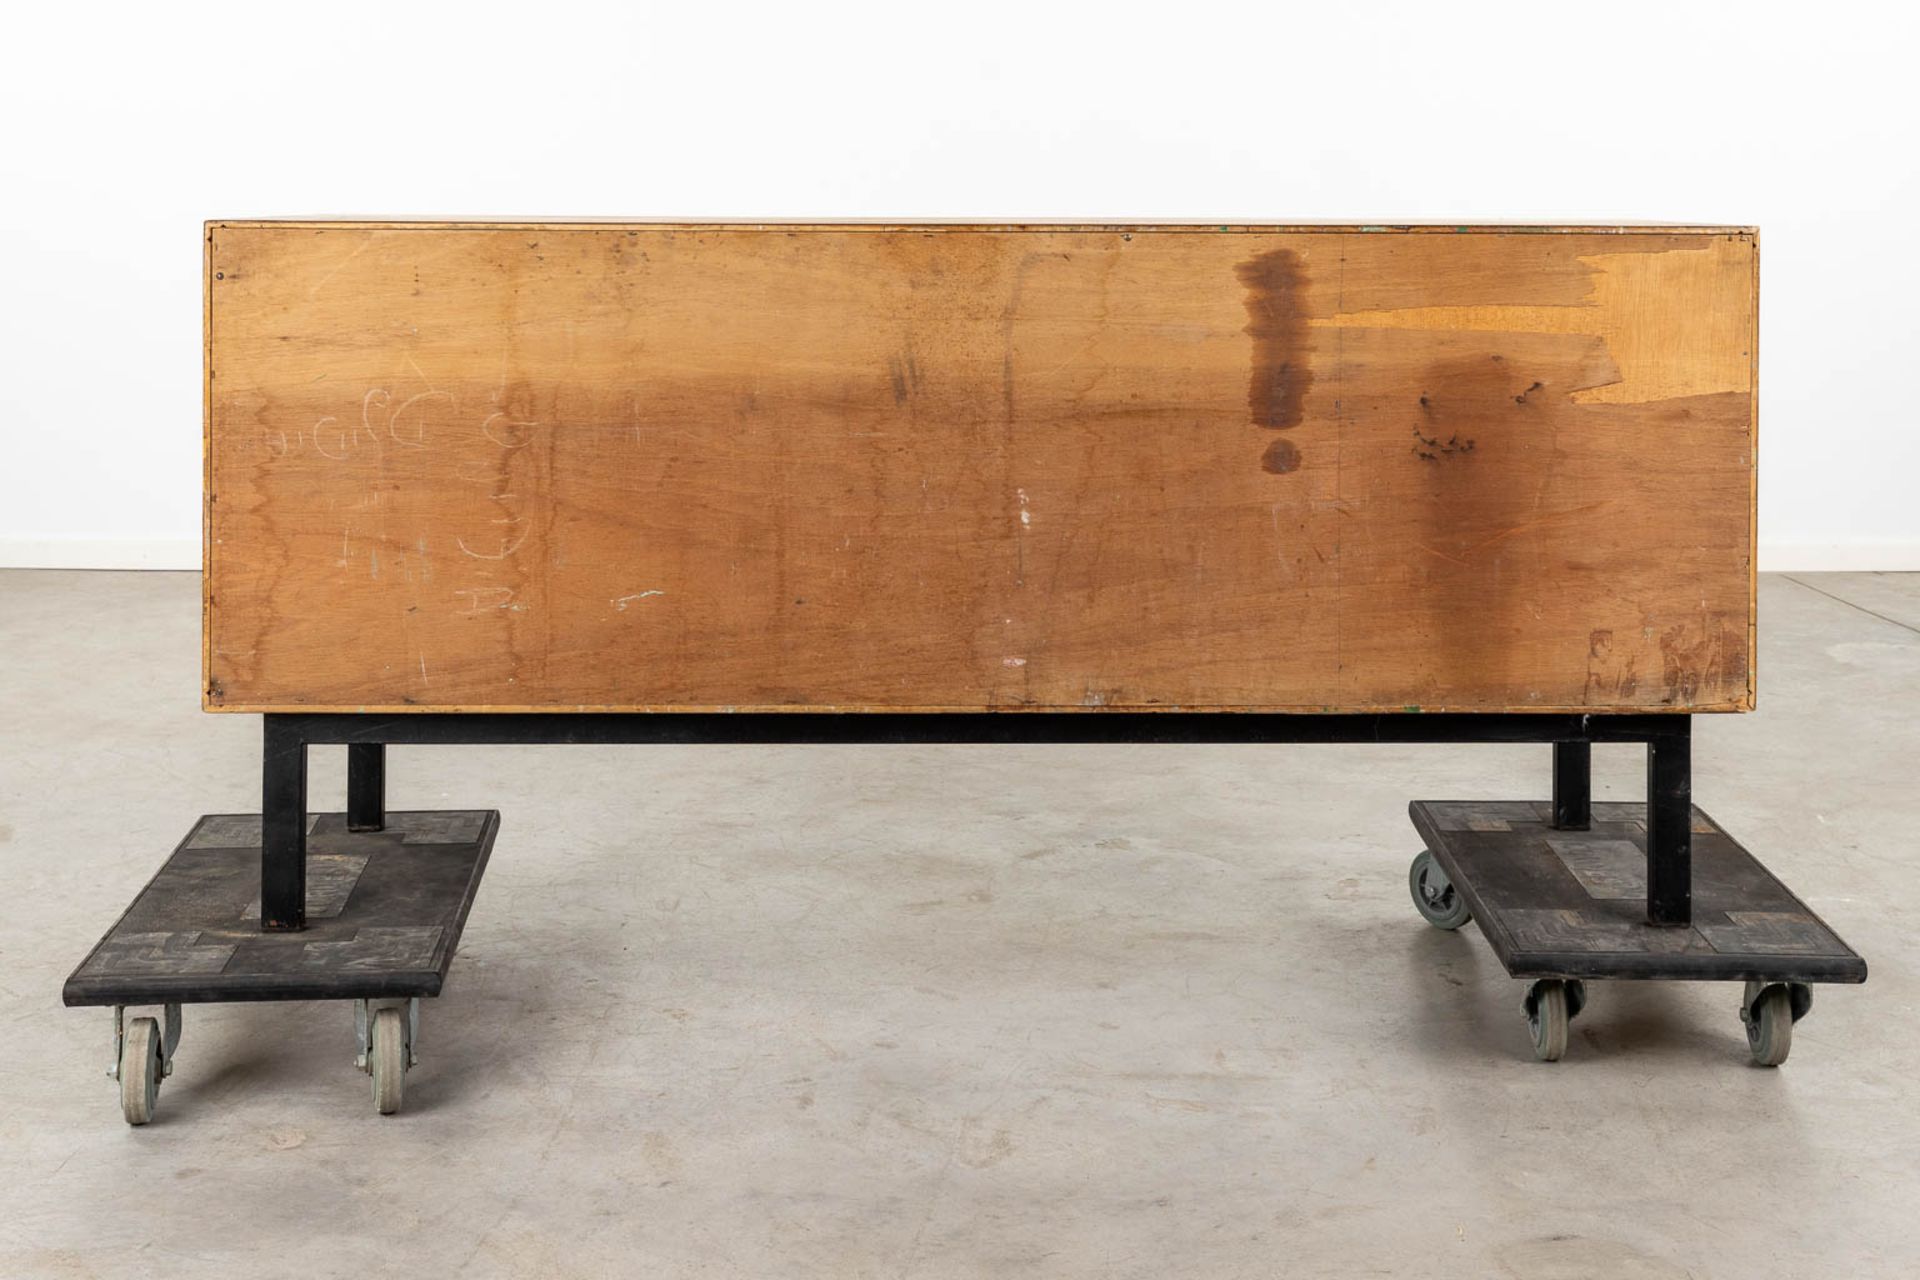 Charlotte PERRIAND (1903-1999) 'Cansado' a sideboard (D:47 x W:158 x H:73 cm) - Image 7 of 16